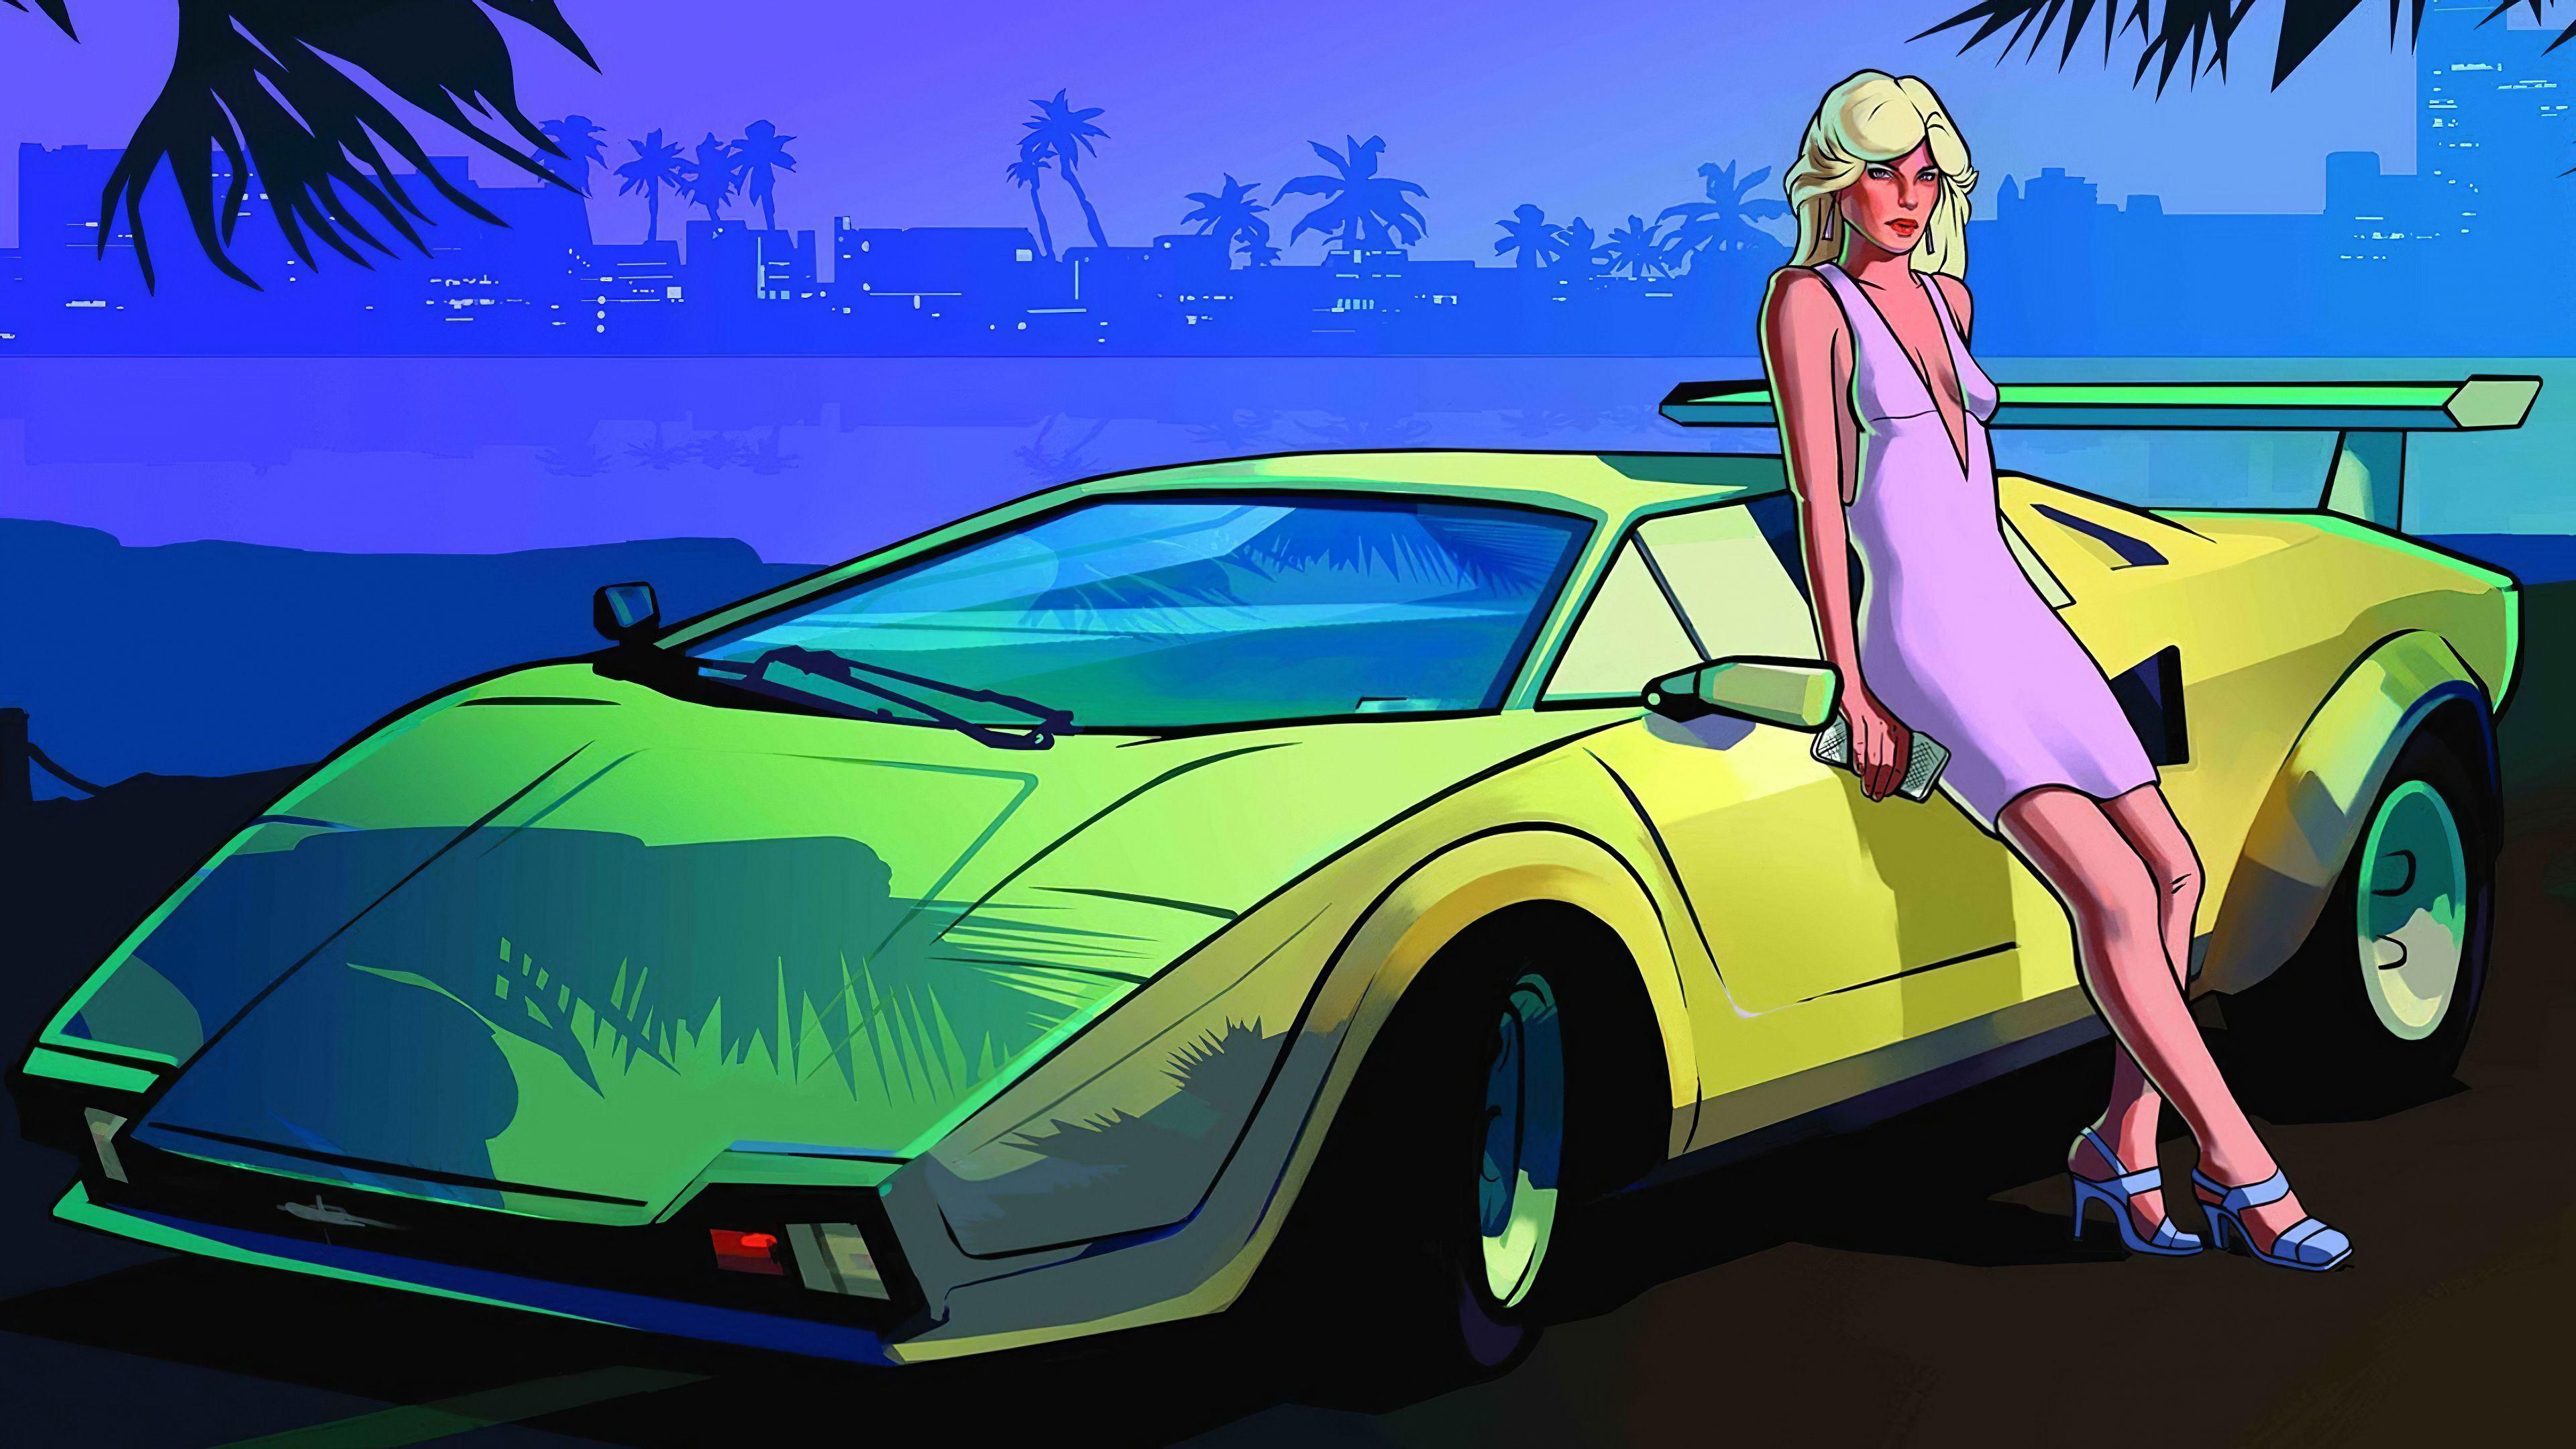 Grand Theft Auto Women Wallpapers Wallpaper Cave 7529